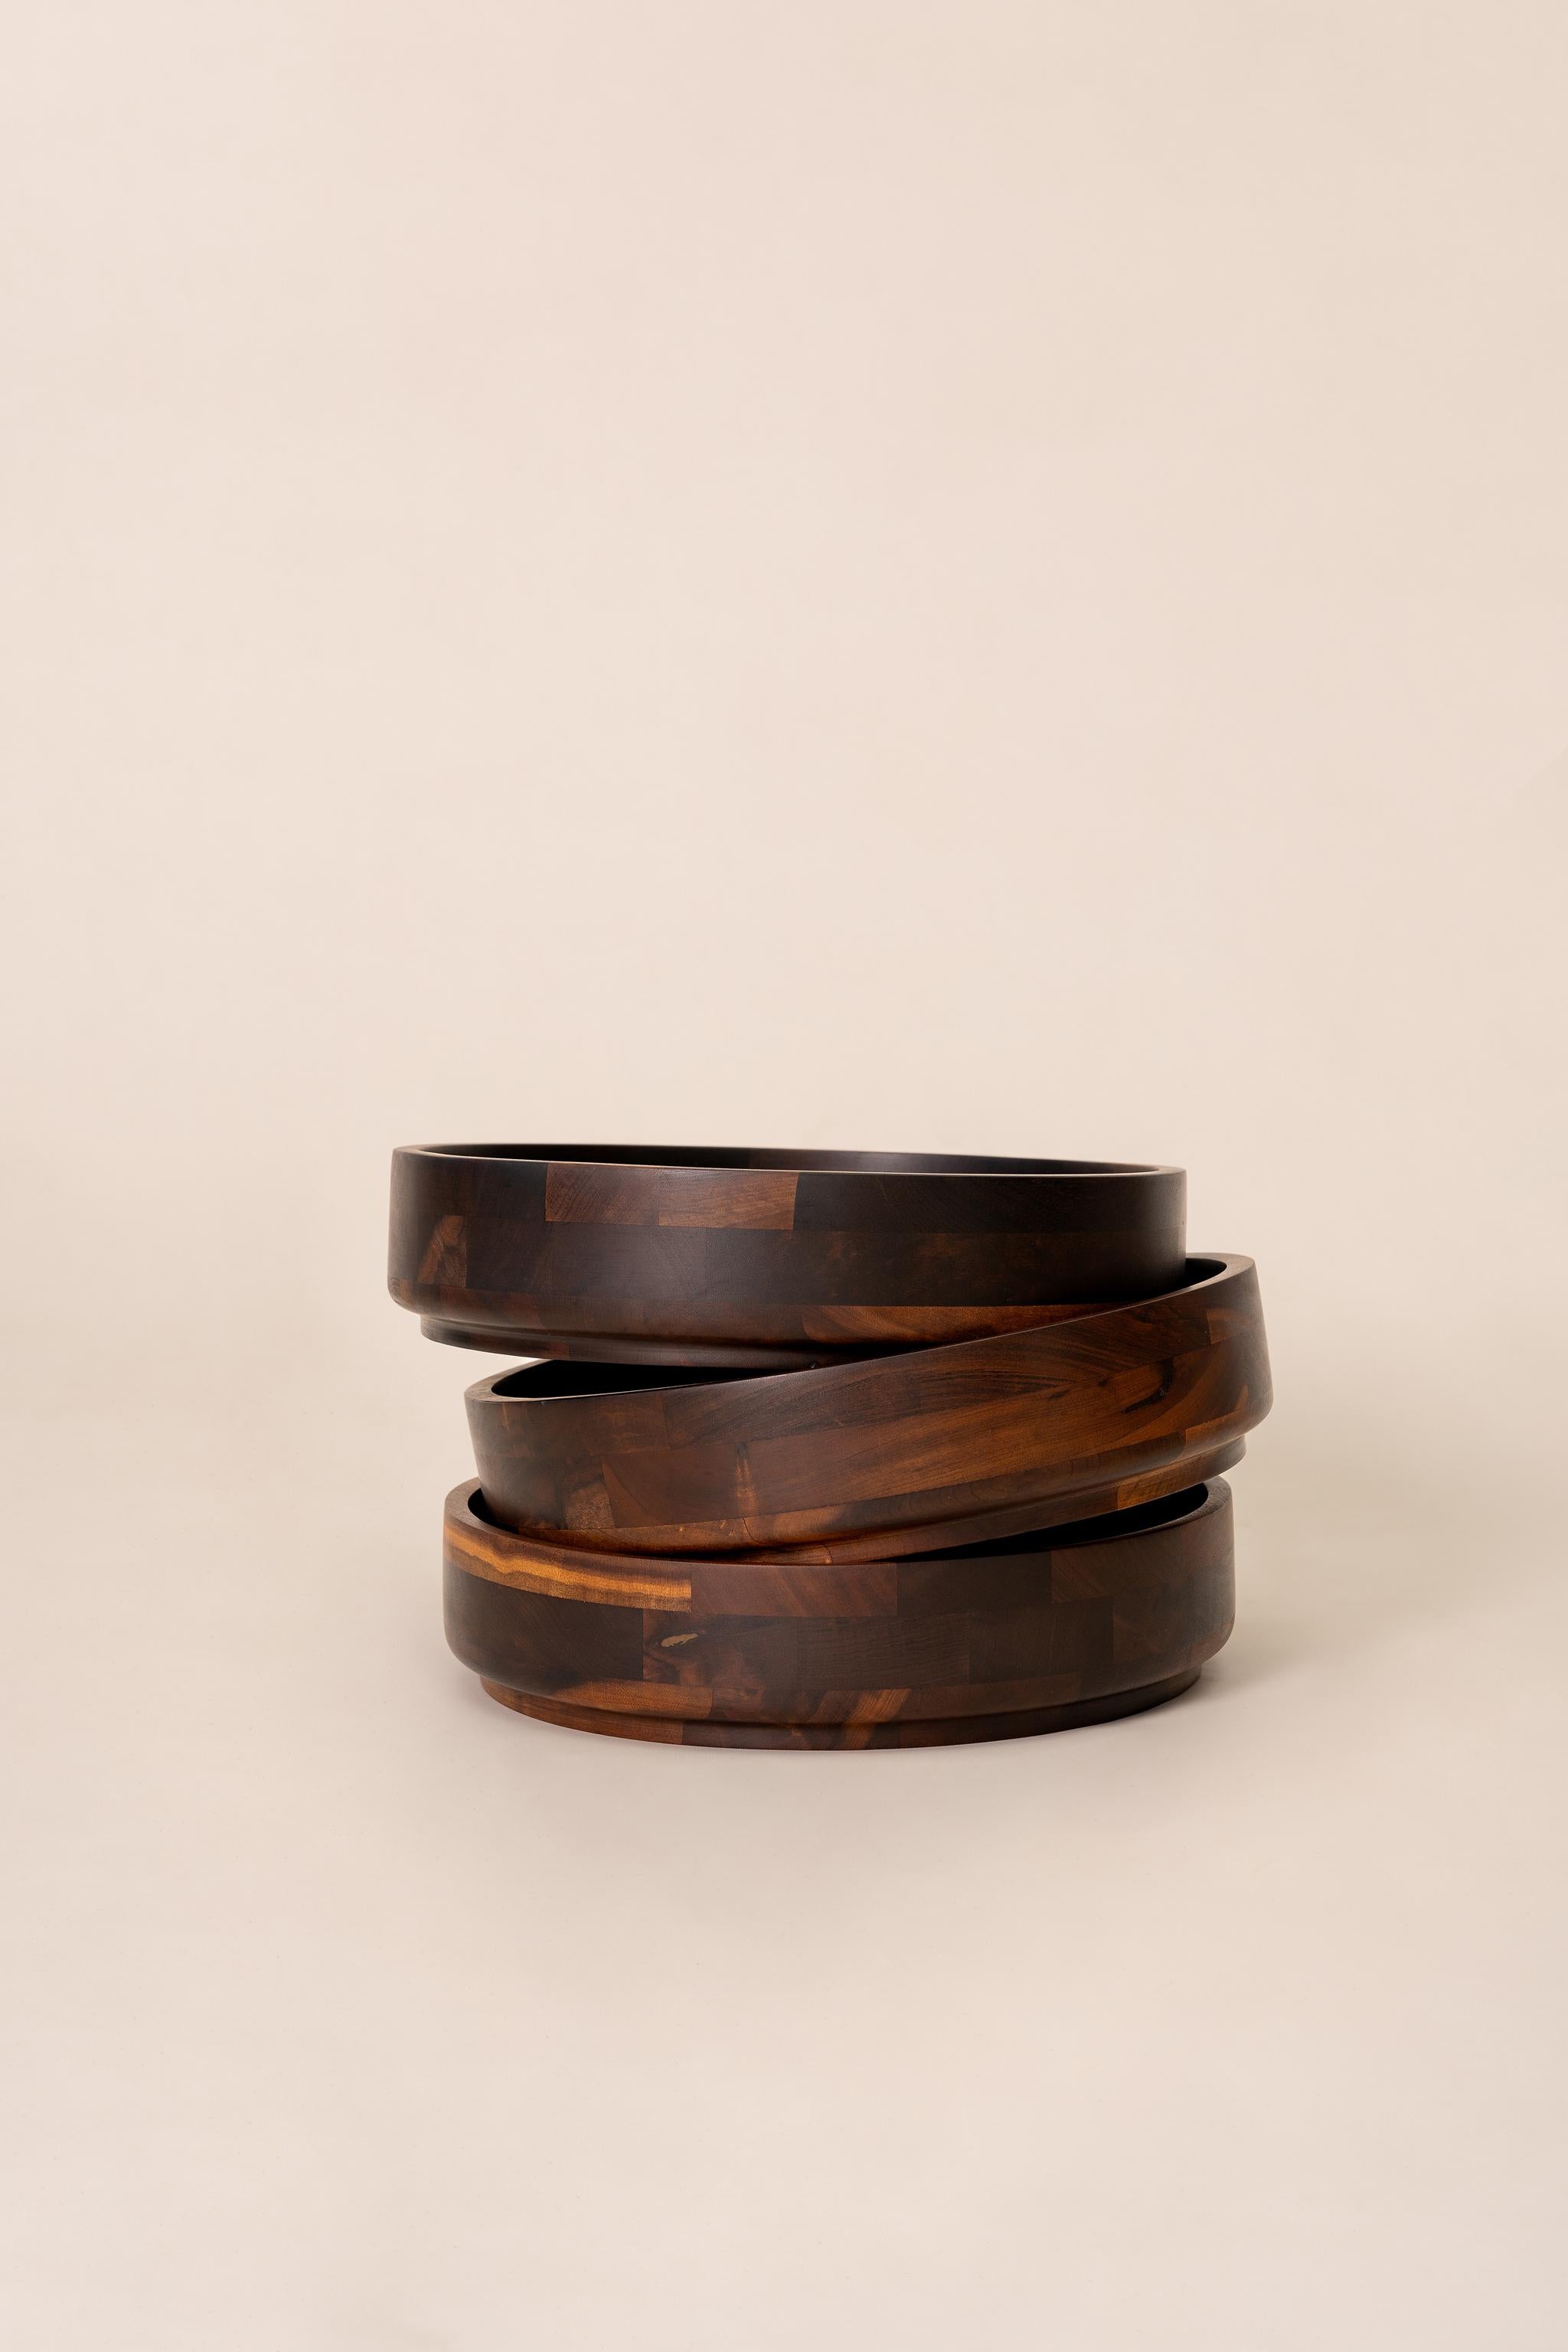 Woodwork Brazilian Midcentury Centerpiece Bowl in Noble Wood, c. 1970 For Sale